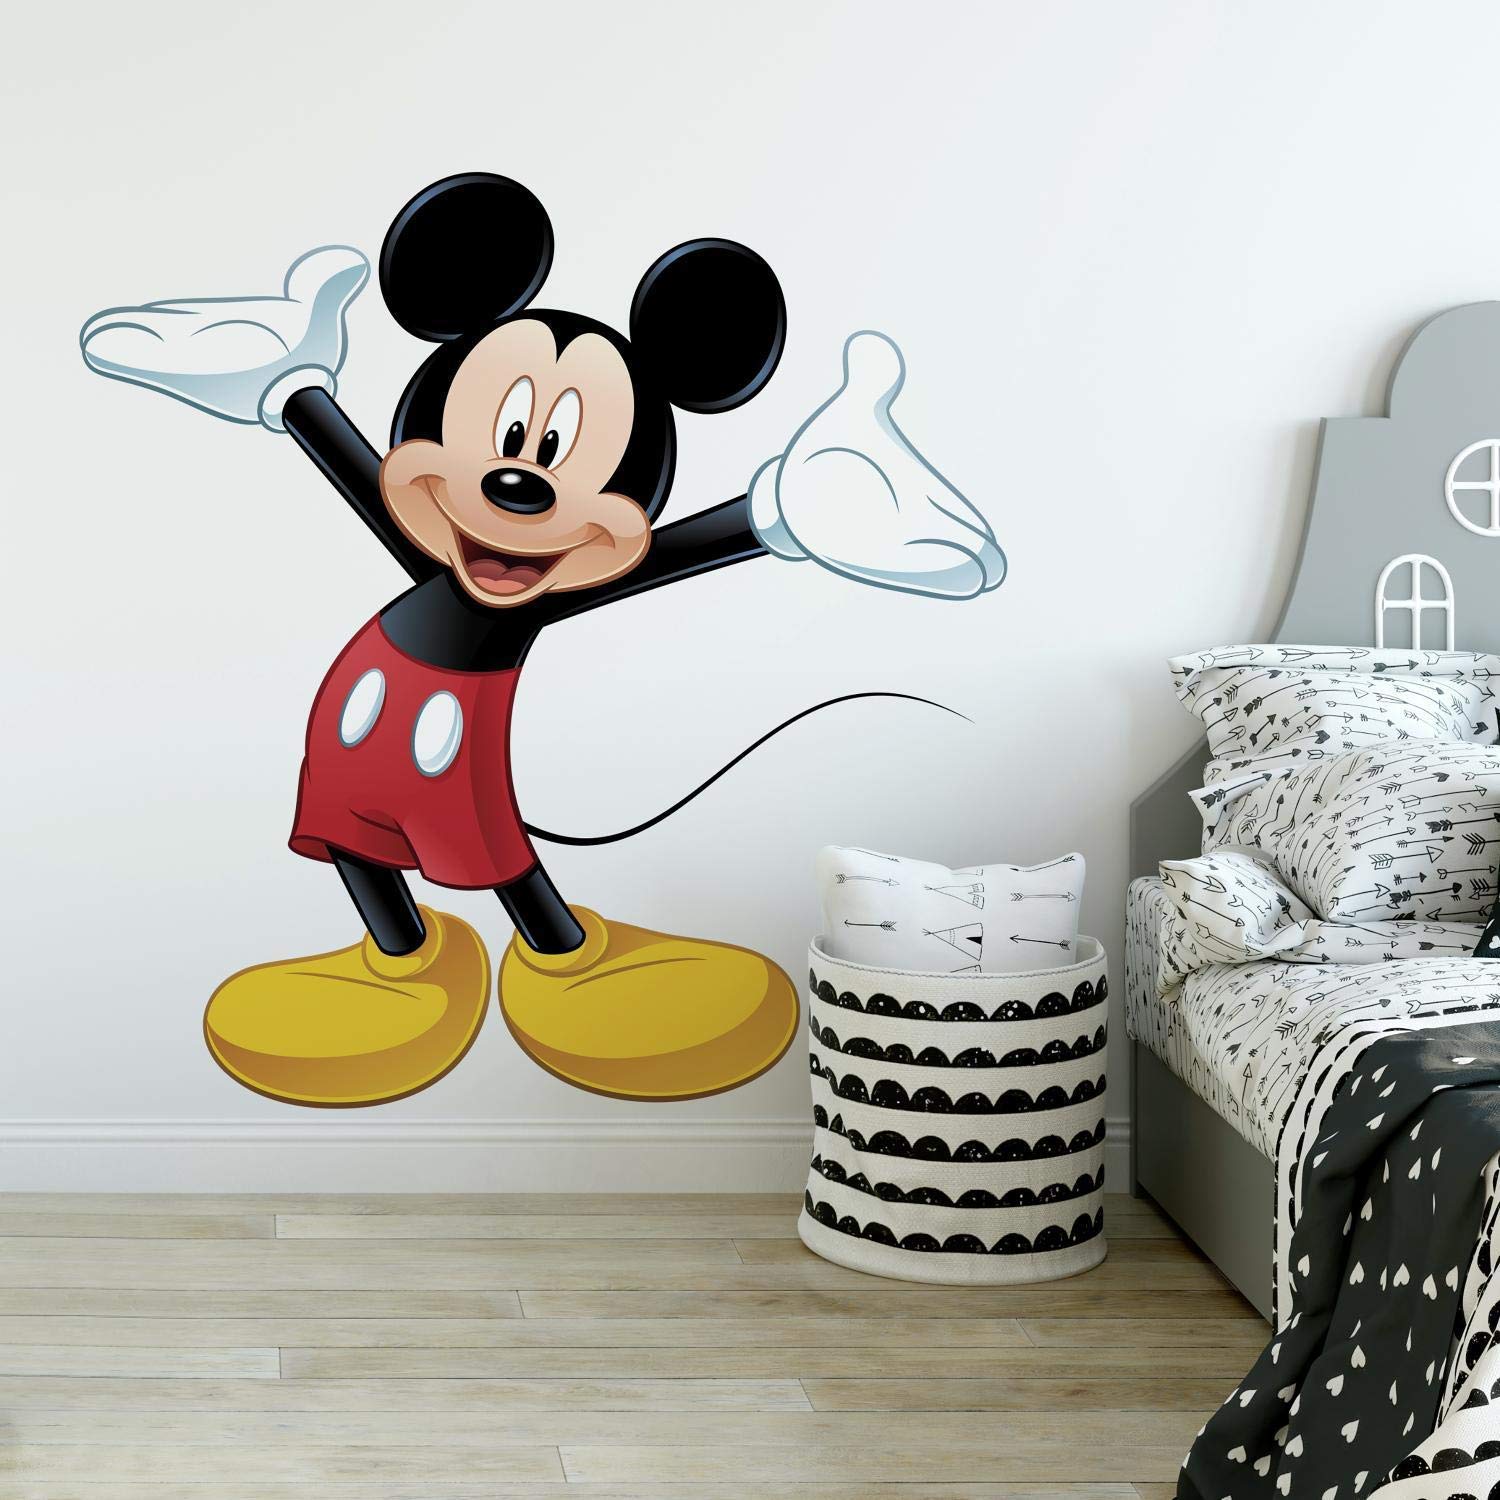 RoomMates Disney Mickeys Clubhouse Mickey Mouse Giant Wall Sticker